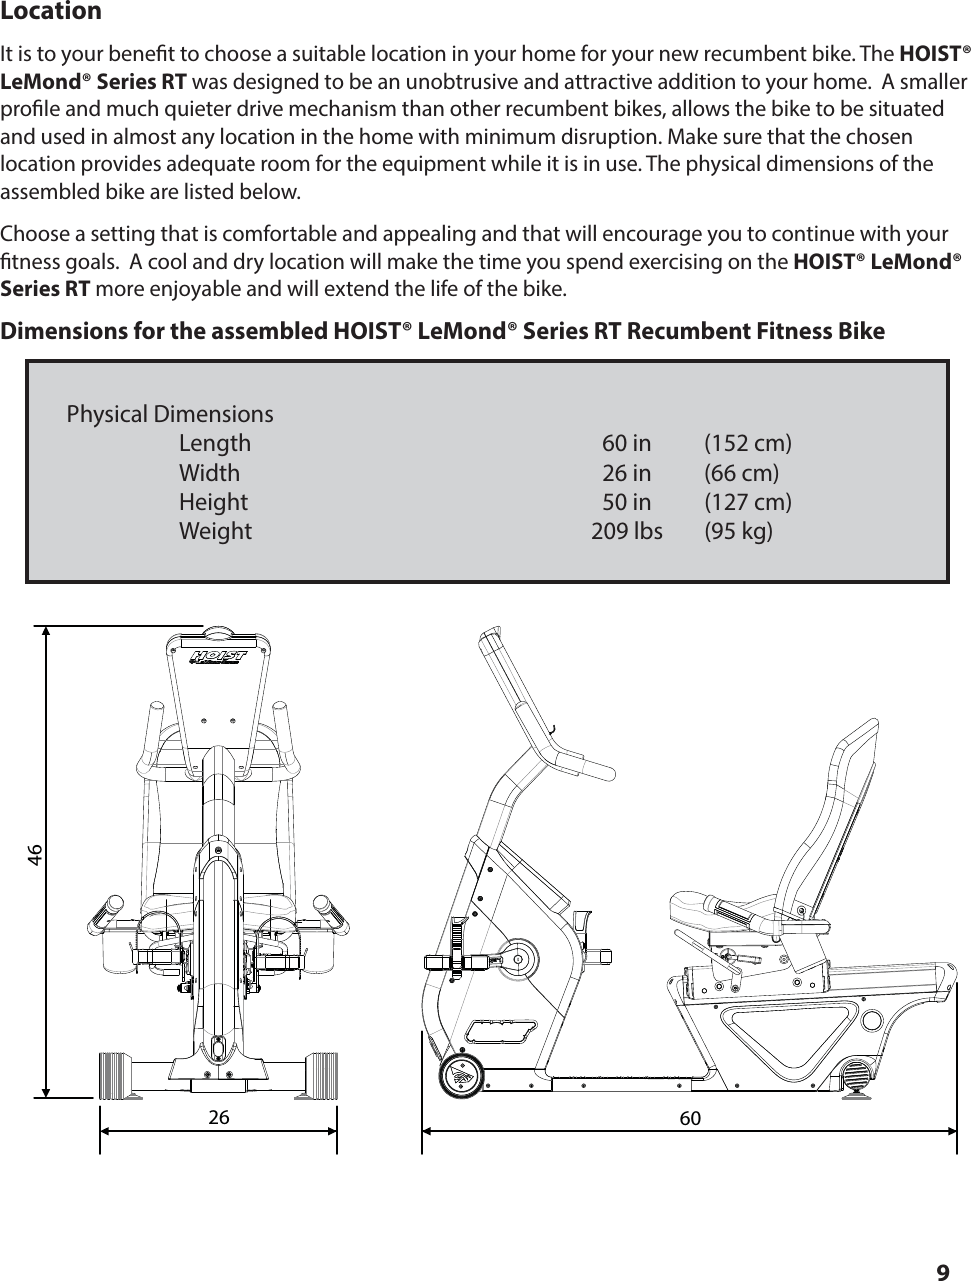 9LocationIt is to your bene t to choose a suitable location in your home for your new recumbent bike. The HOIST® LeMond® Series RT was designed to be an unobtrusive and attractive addition to your home.  A smaller pro le and much quieter drive mechanism than other recumbent bikes, allows the bike to be situated and used in almost any location in the home with minimum disruption. Make sure that the chosen    location provides adequate room for the equipment while it is in use. The physical dimensions of the assembled bike are listed below. Choose a setting that is comfortable and appealing and that will encourage you to continue with your  tness goals.  A cool and dry location will make the time you spend exercising on the HOIST® LeMond® Series RT more enjoyable and will extend the life of the bike.Dimensions for the assembled HOIST® LeMond® Series RT Recumbent Fitness BikePhysical Dimensions     Length  60 in  (152 cm)   Width  26 in  (66 cm)    Height  50 in  (127 cm)   Weight  209 lbs  (95 kg)SETTING UP AND OPERATING THE HOIST® LeMond® Series RT26 6046